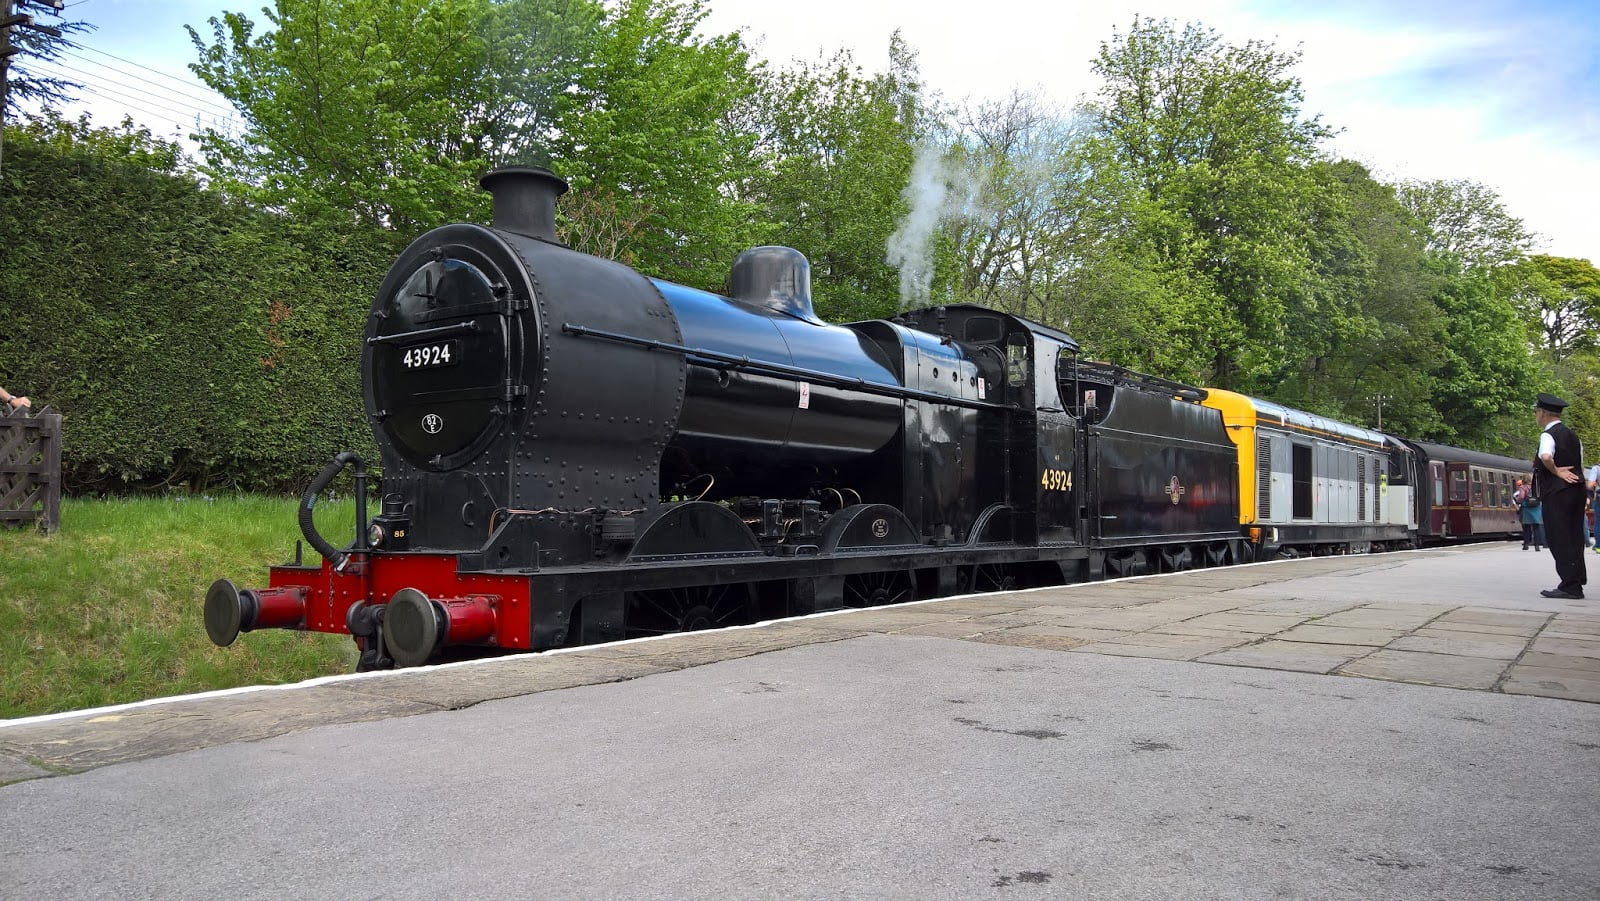 locomotive 4F 43924 and No. 20031 at Oxenhope